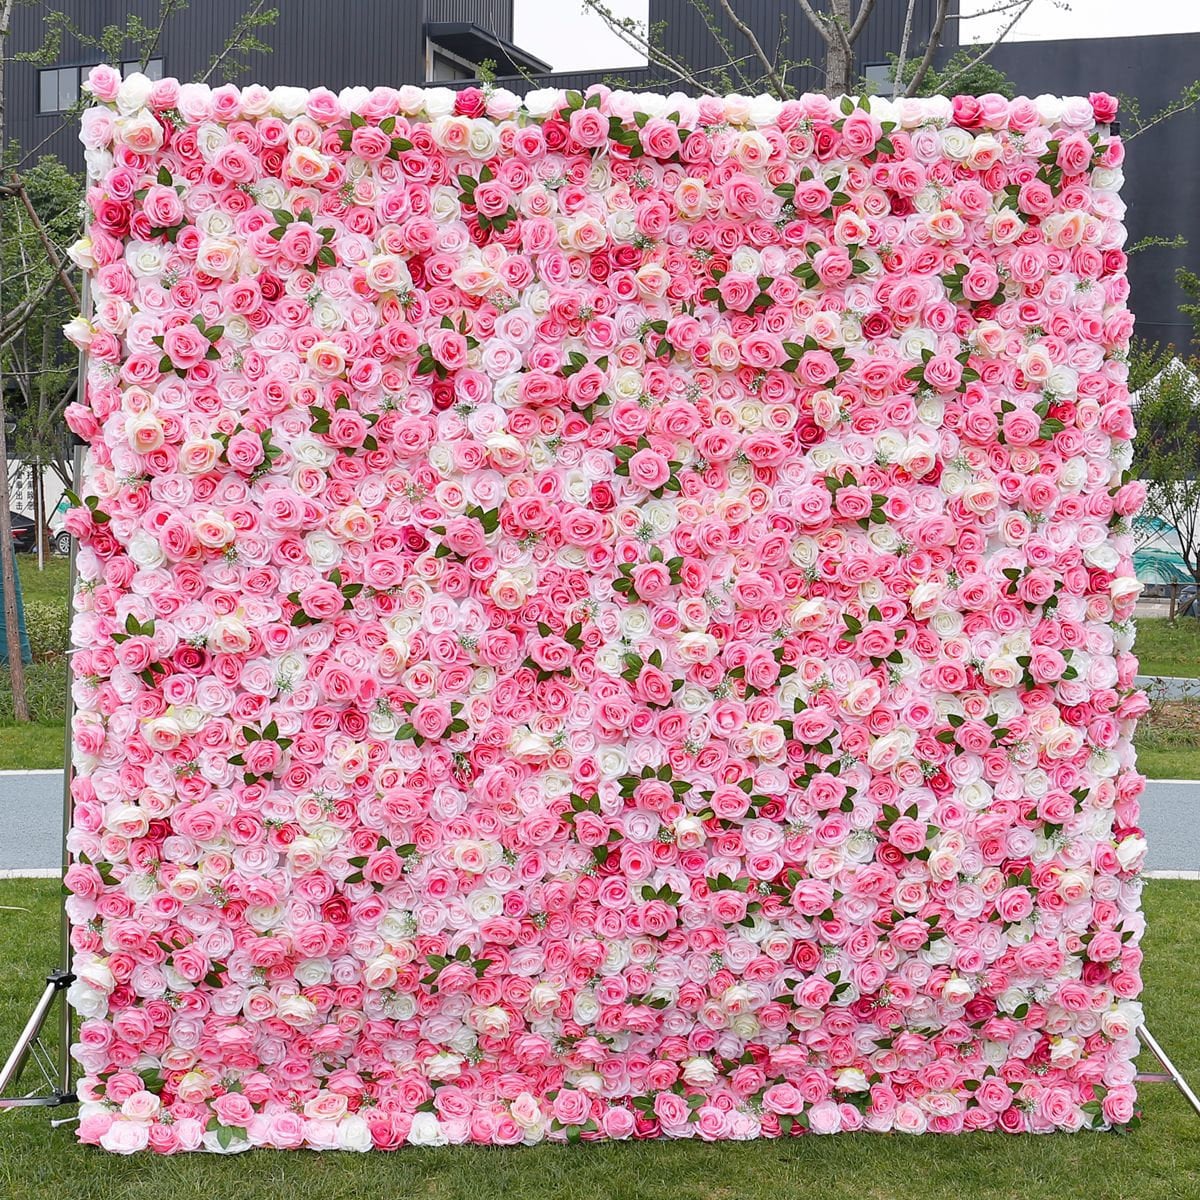 Pink Floral Wall For Wedding Arrangement Event Salon Party Photography Backdrop Fabric Rolling Up Curtain Fabric Cloth